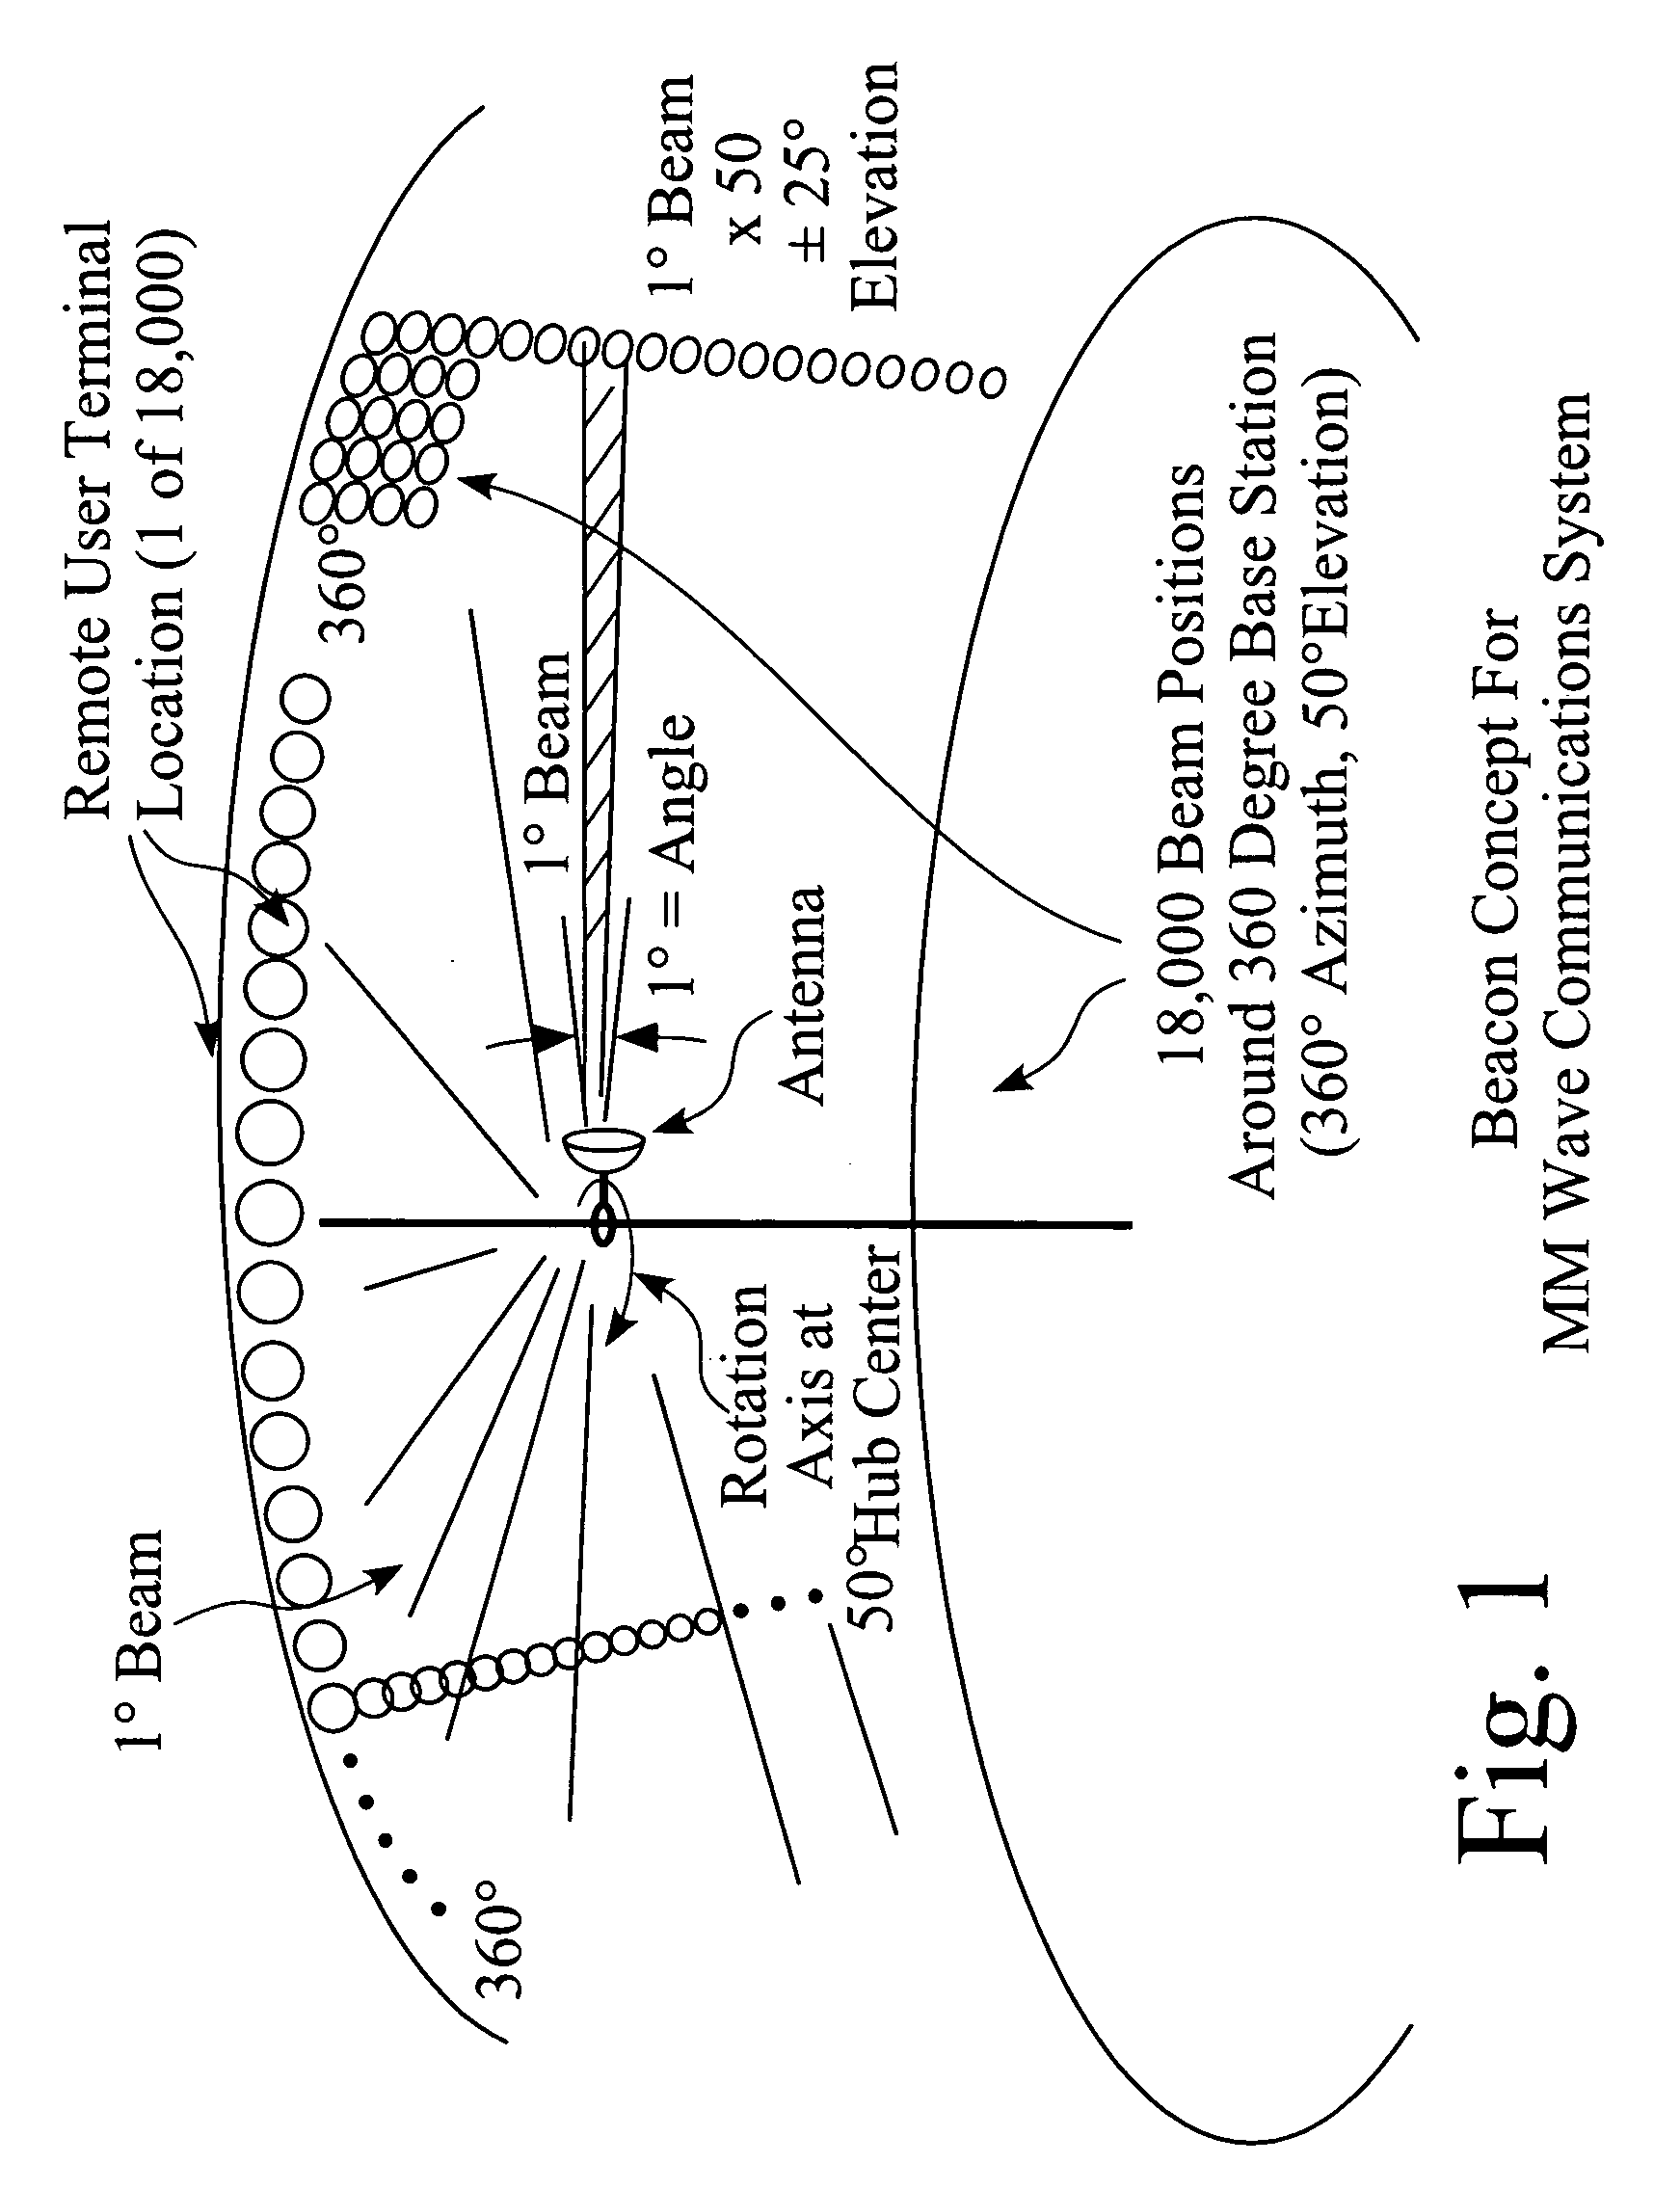 Multiple-point to multiple-point communication system